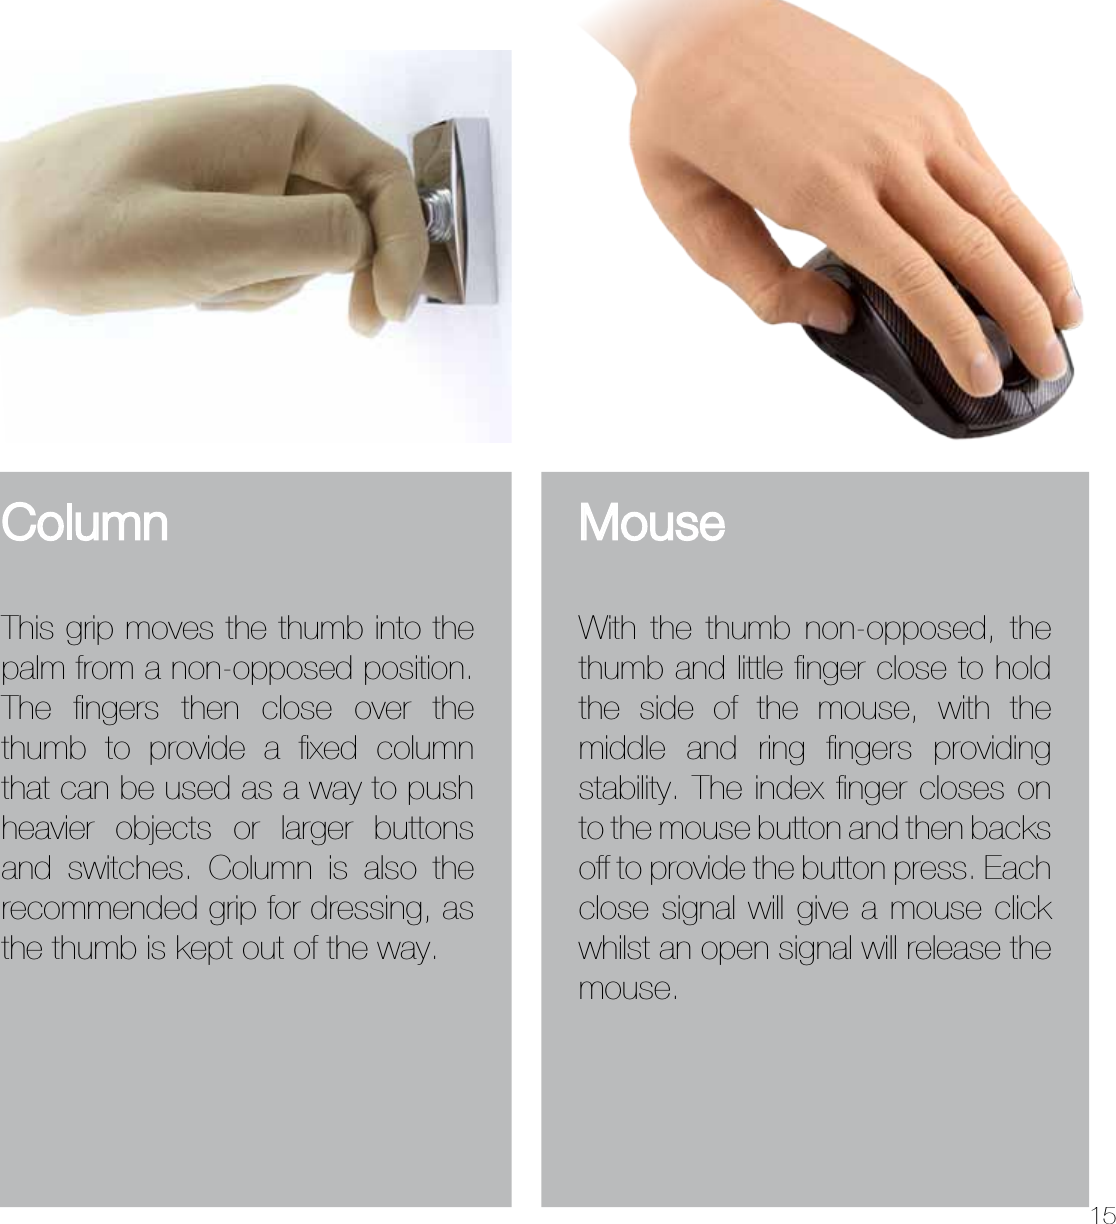 15ColumnThis grip moves the thumb into the palm from a non-opposed position. The ﬁngers then close over the thumb to provide a ﬁxed column that can be used as a way to push heavier objects or larger buttons and switches. Column is also the recommended grip for dressing, as the thumb is kept out of the way.MouseWith the thumb non-opposed, the thumb and little ﬁnger close to hold the side of the mouse, with the middle and ring ﬁngers providing stability. The index ﬁnger closes on to the mouse button and then backs off to provide the button press. Each close signal will give a mouse click whilst an open signal will release the mouse.